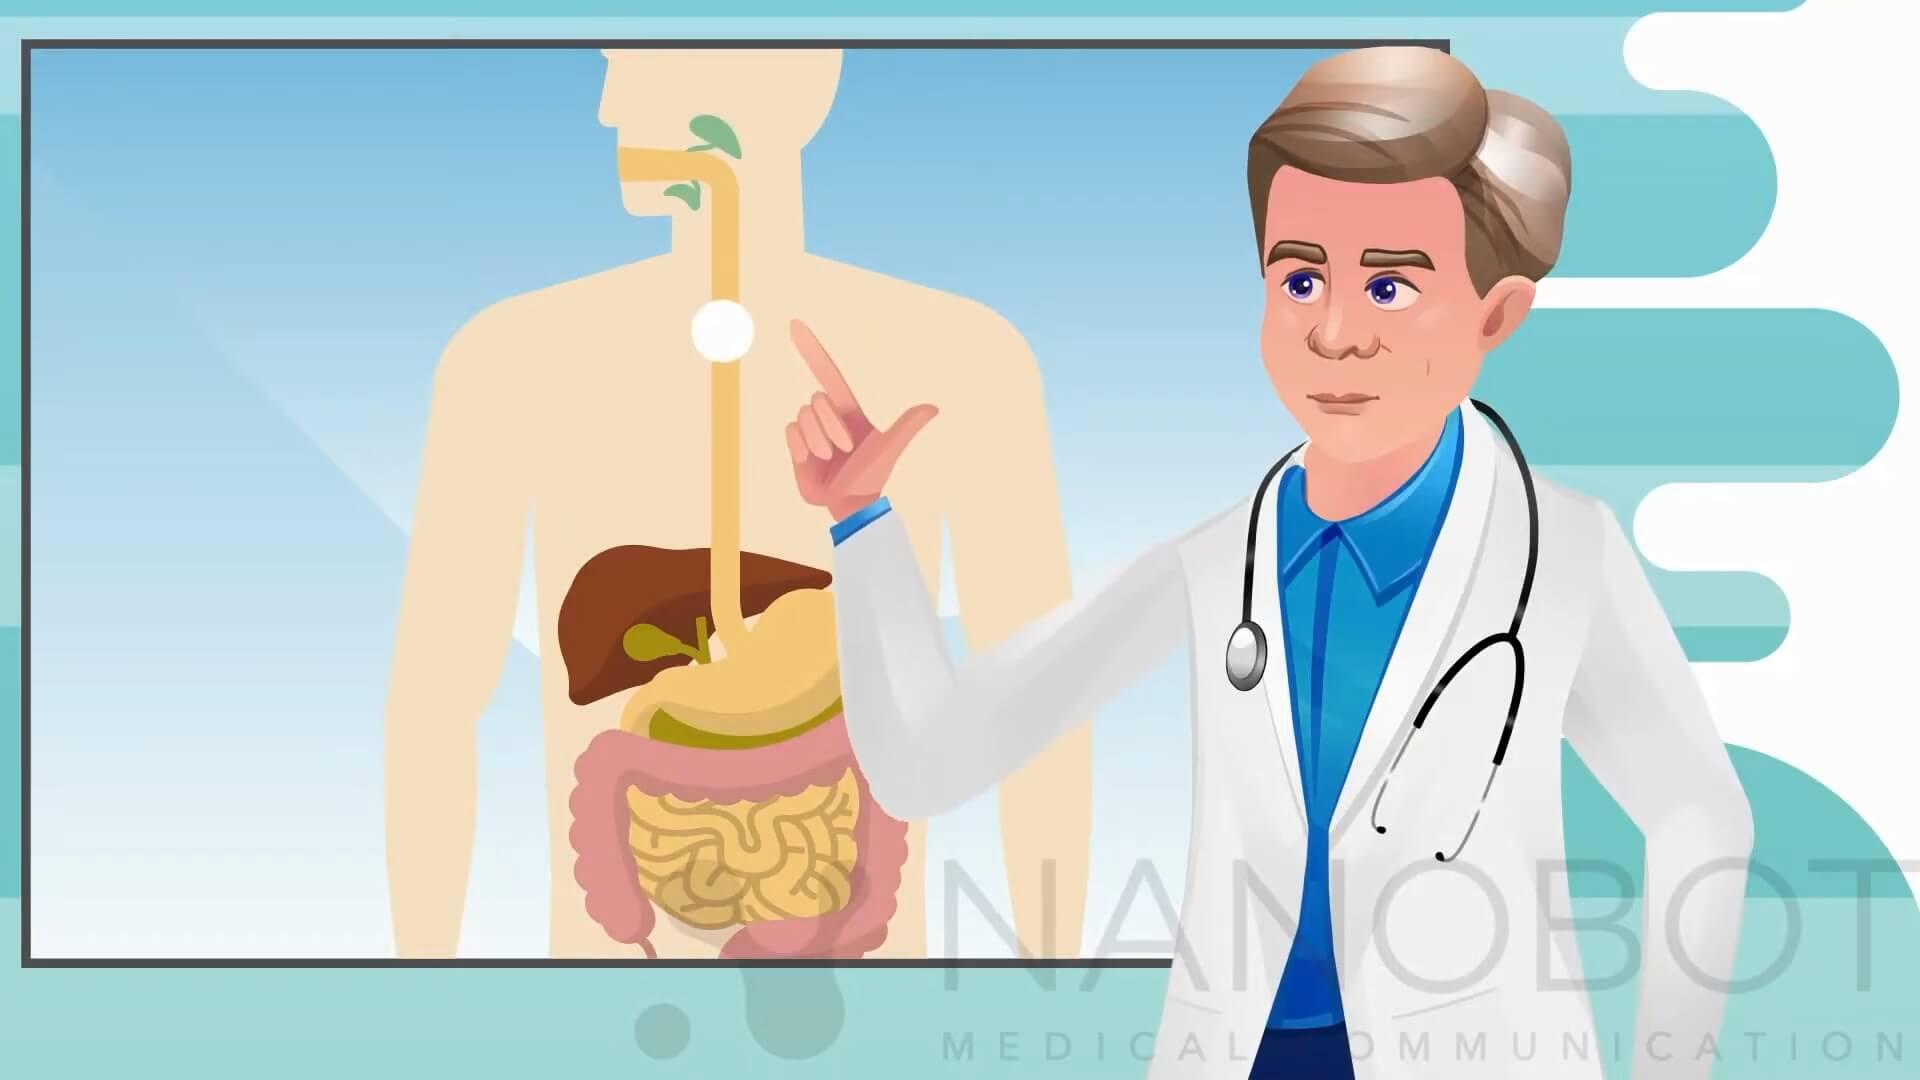 Character Medical Animation